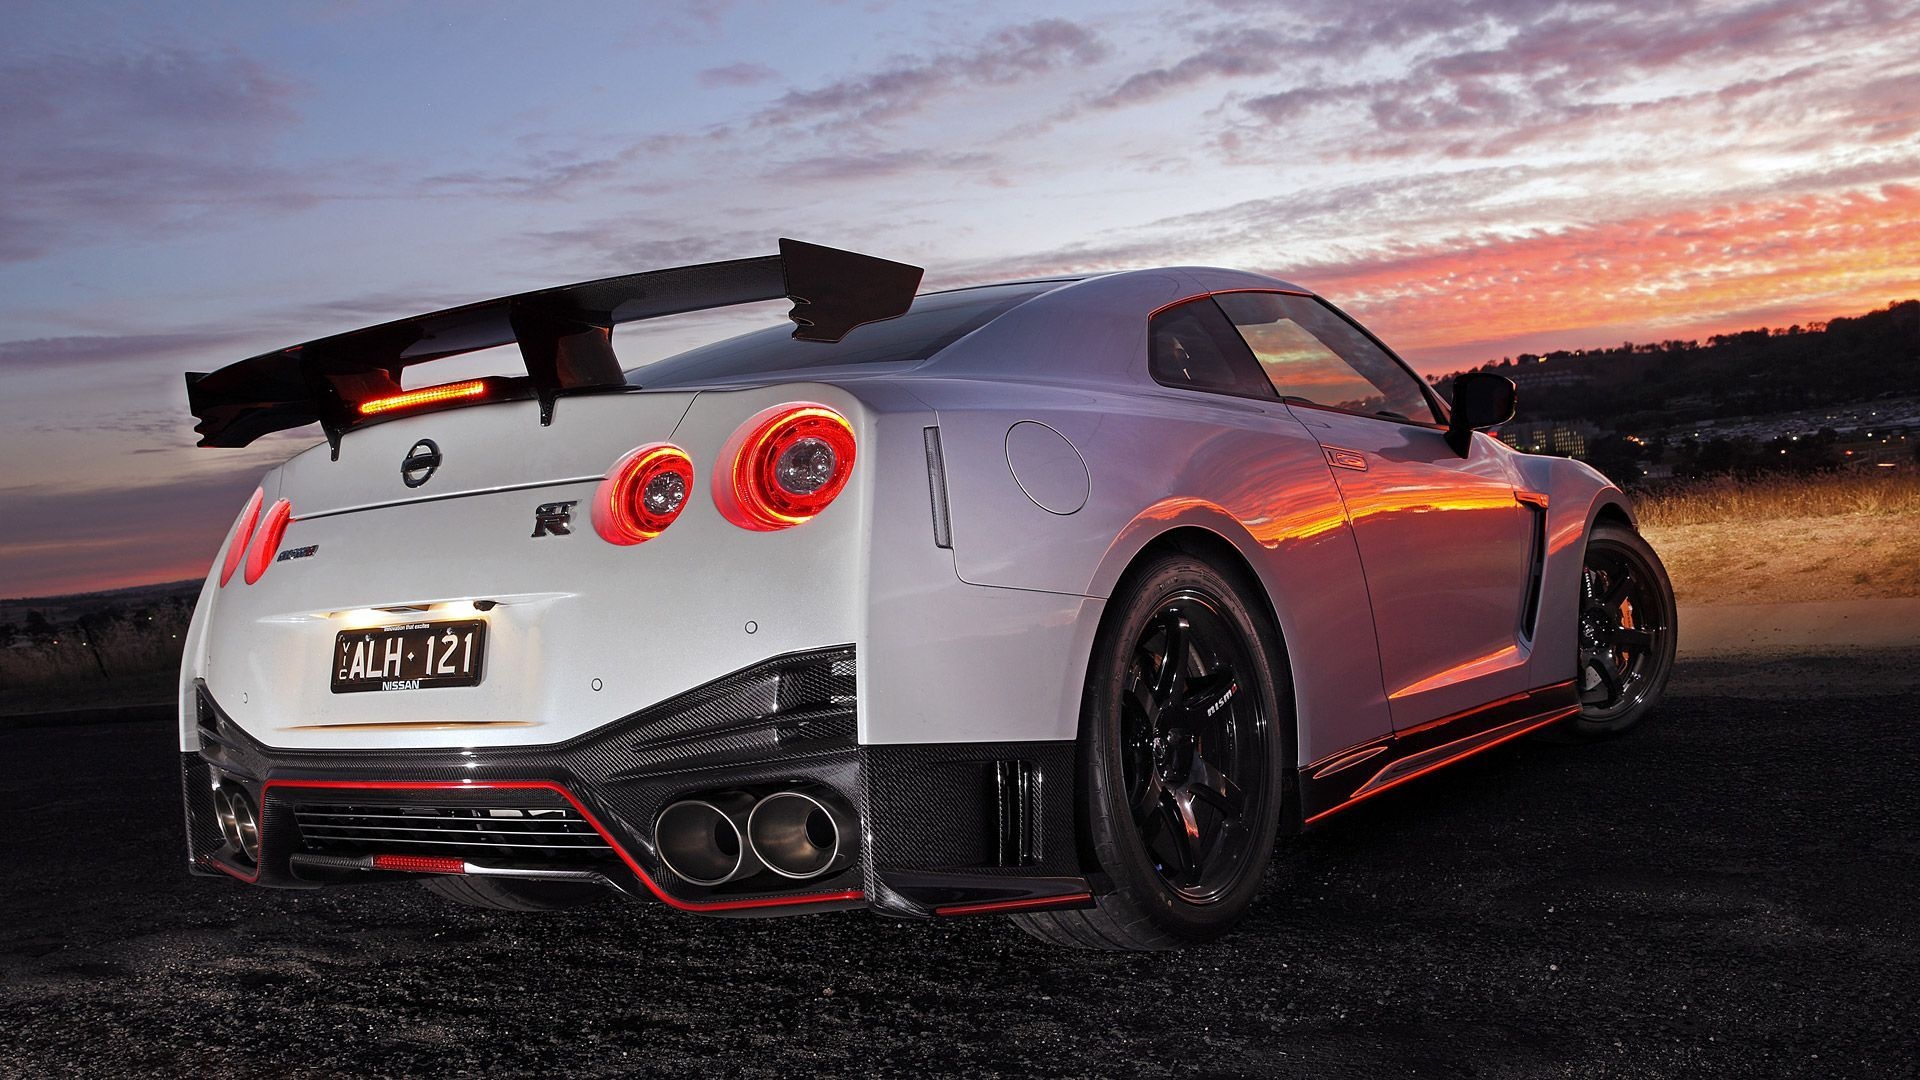 Nissan GT-R Nismo, Top free backgrounds, Performance masterpiece, Track-tuned, 1920x1080 Full HD Desktop